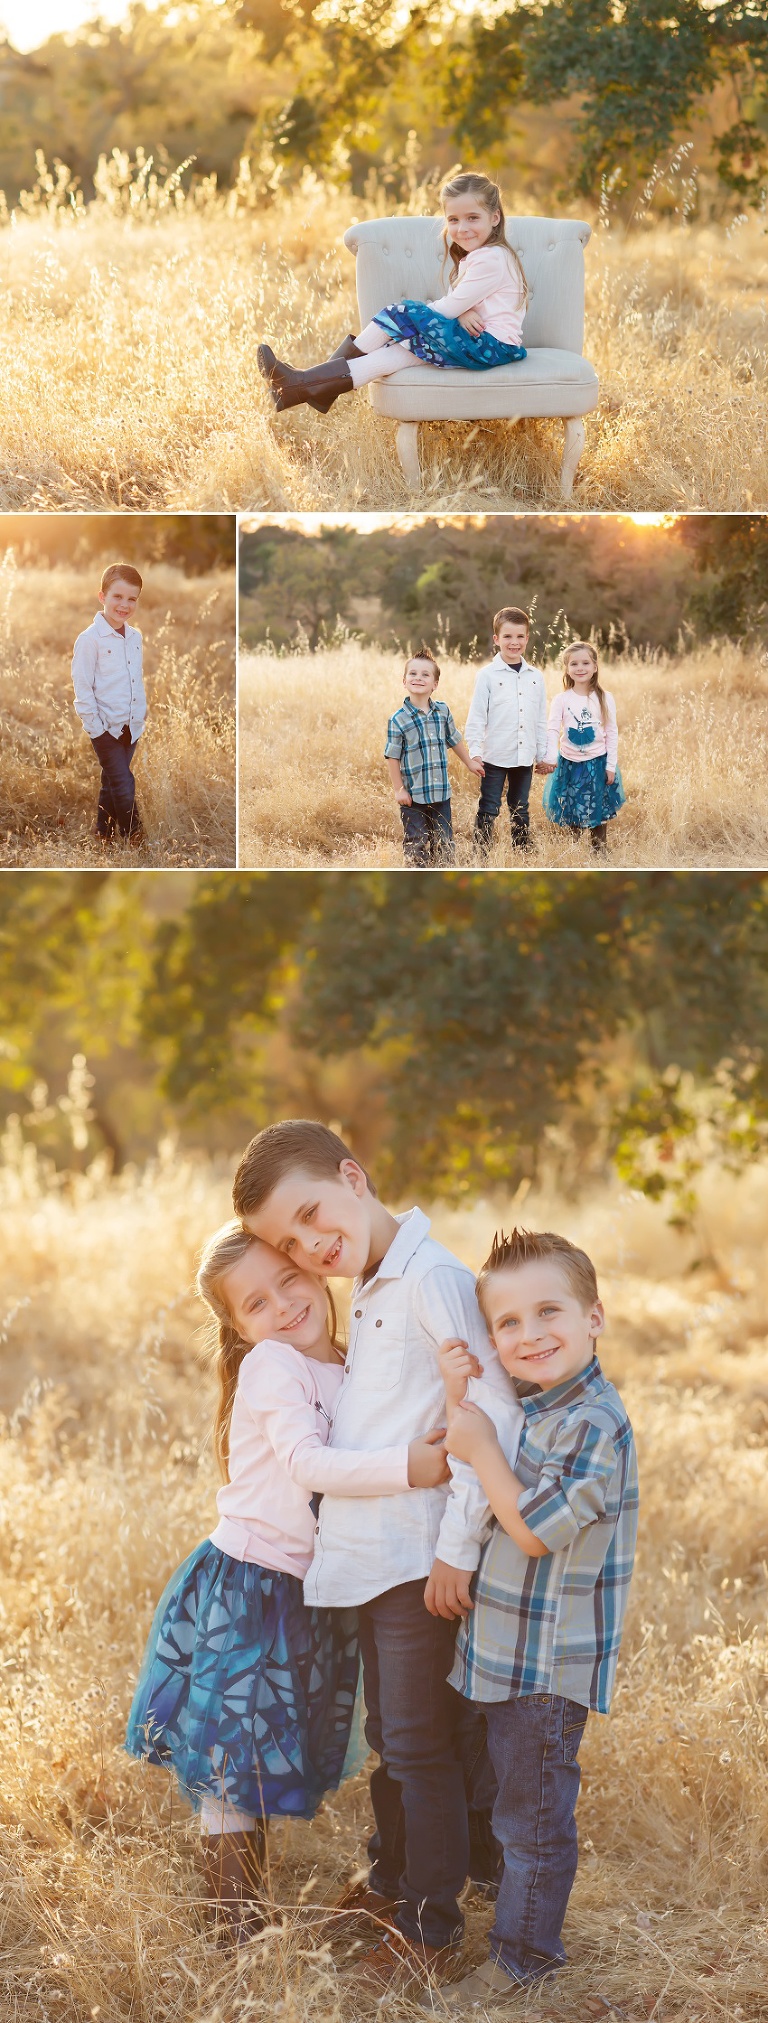 Fall family pictures in Folsom with El Dorado Hills photographer Colleen Sanders grasses oak trees golden light kids family fall mini sessions.